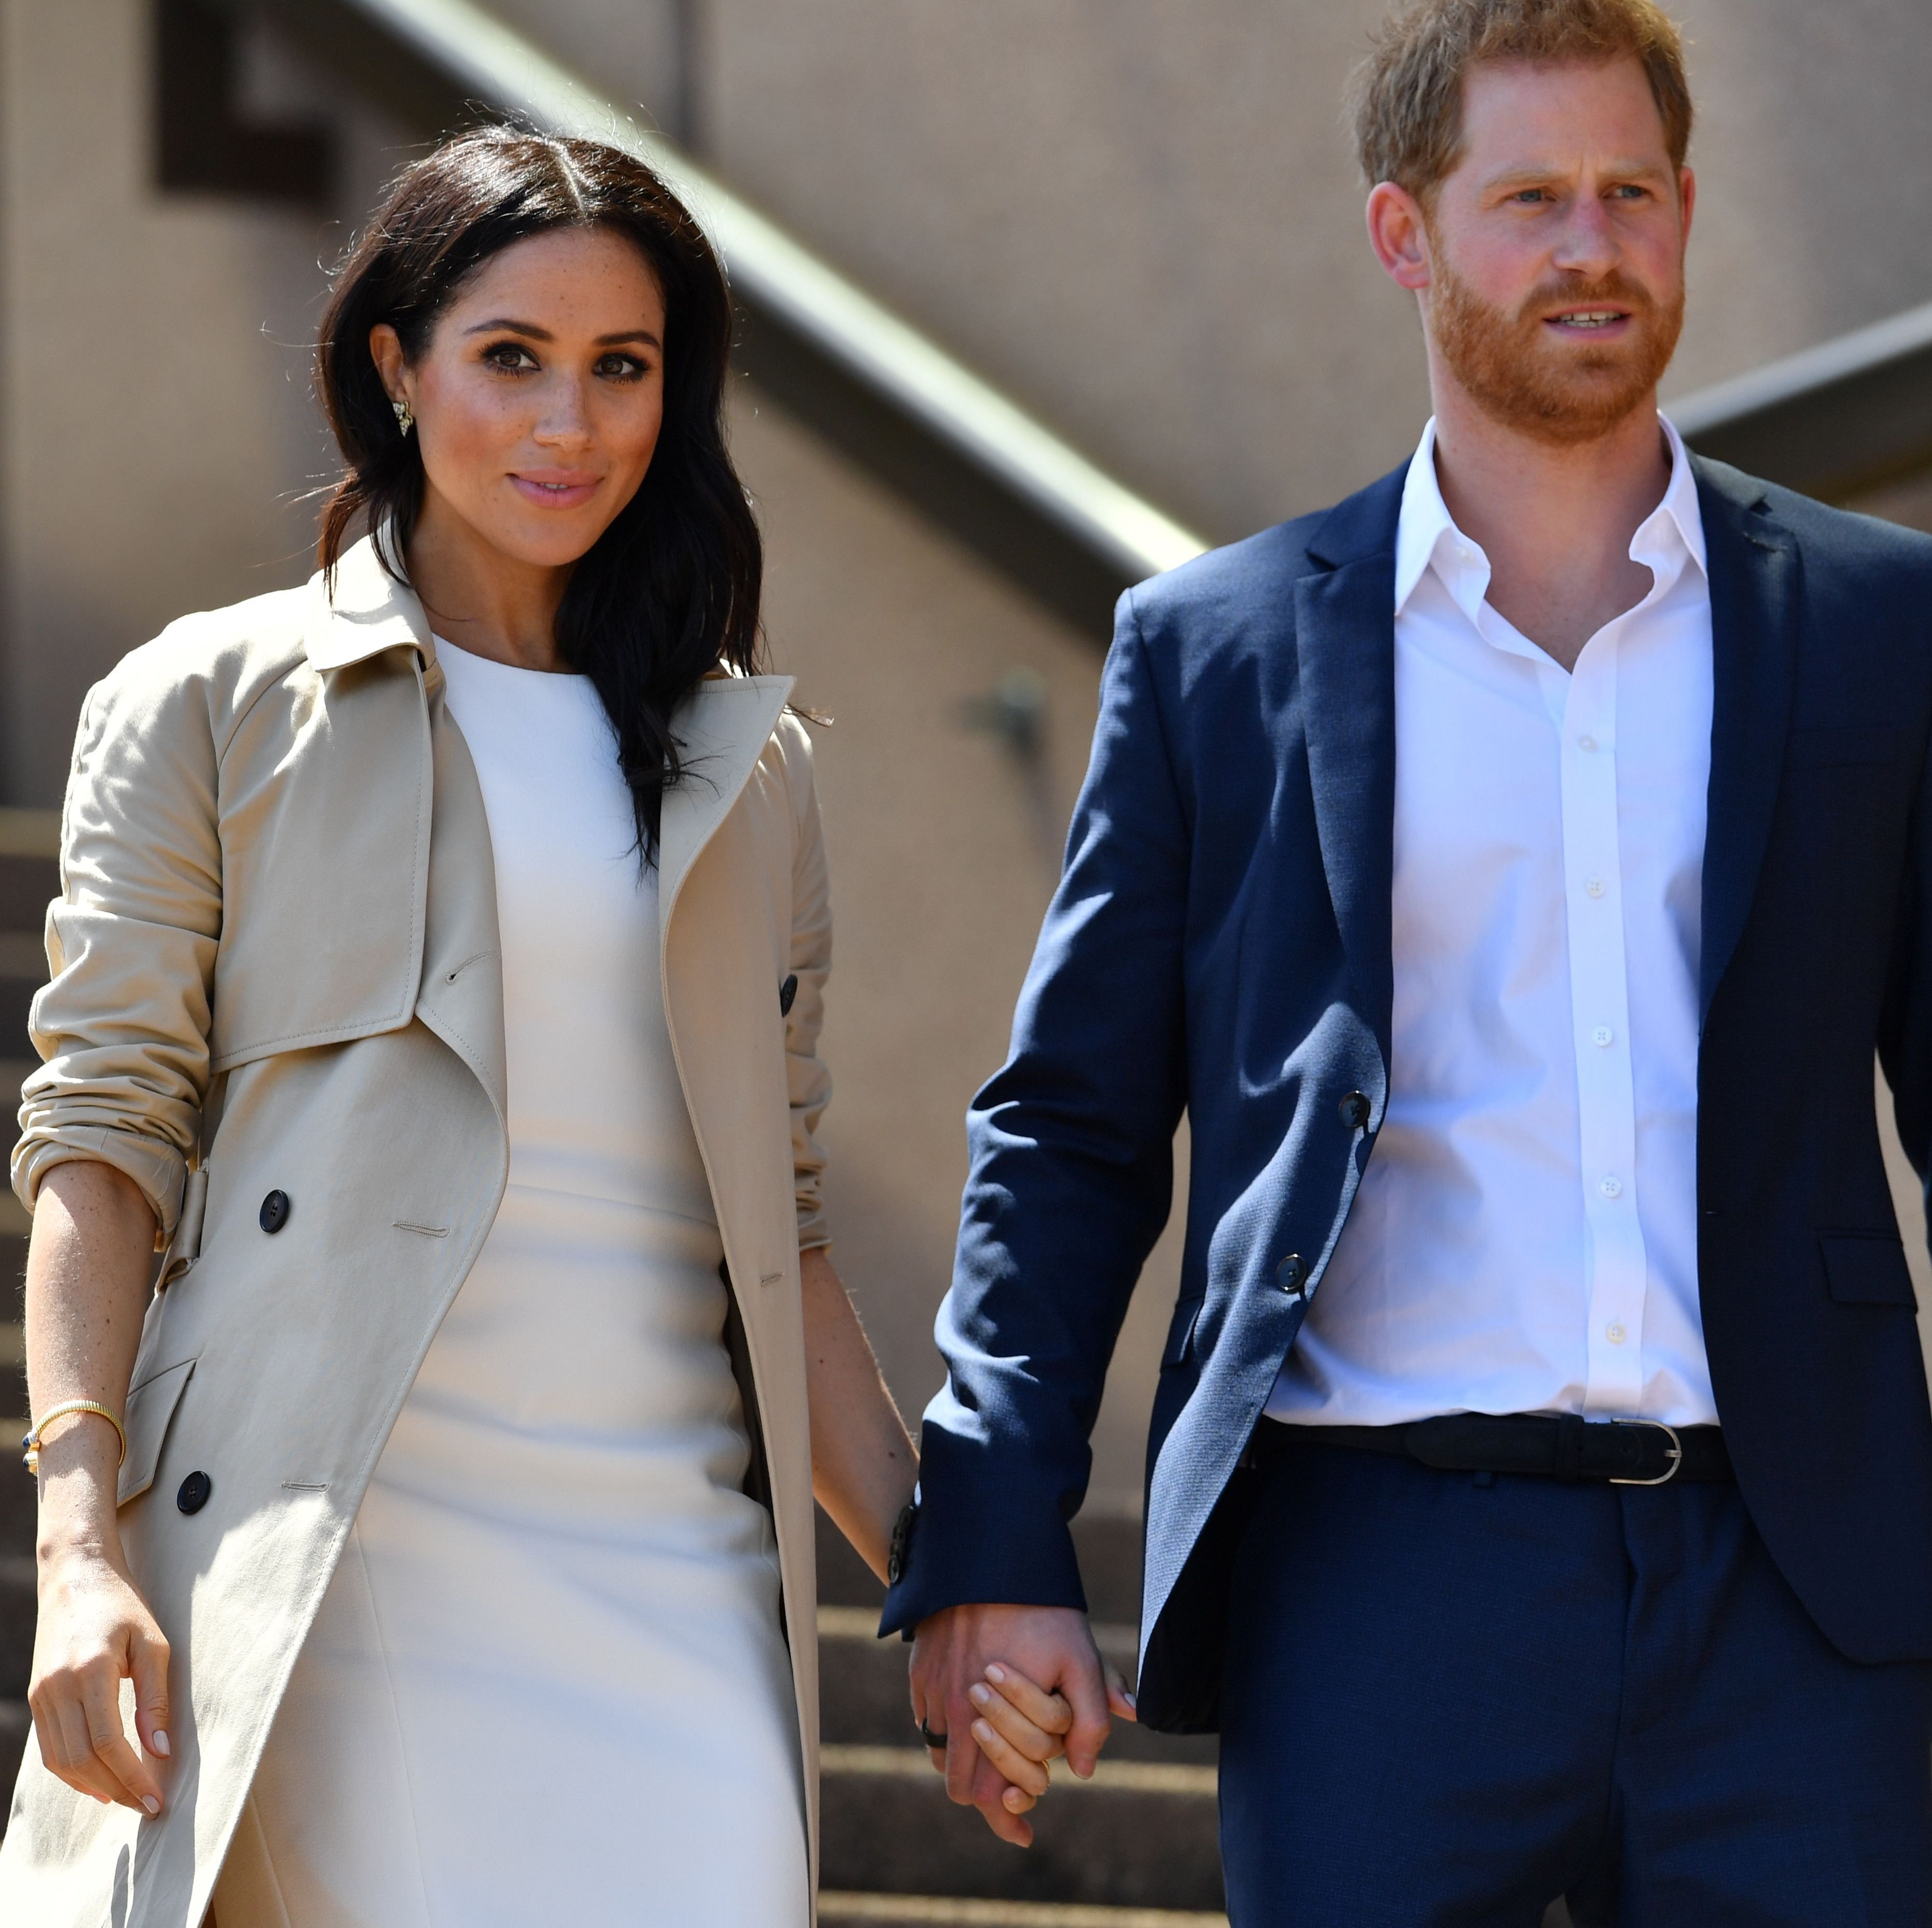 Meghan Markle and Prince Harry Are 'Sick and Tired of' People Taking 'Cheap Shots at Them'